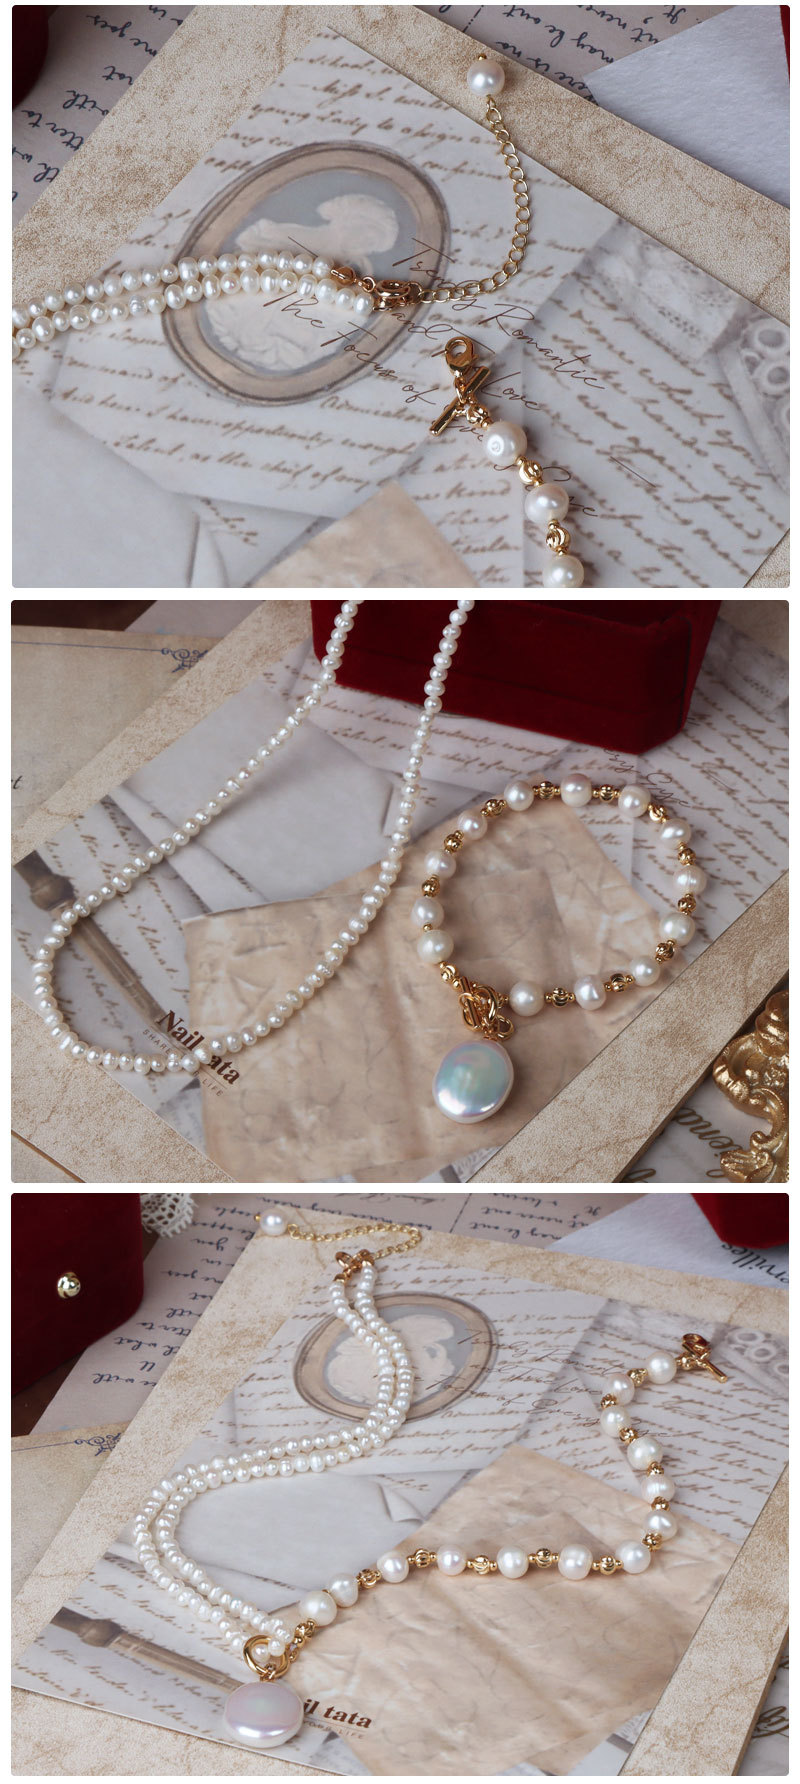 2-In-1 Freshwater Pearl Necklace Chain Detachable a multi-wear Handmade pearl necklace bracelet set Baroque pearl necklace for women girl Freshwater Pearl necklace elegant fashionable jewelry gifts pearl necklace jewelry wedding pearl jewelry handmade pearl jewelry Christmas Valentine Gift